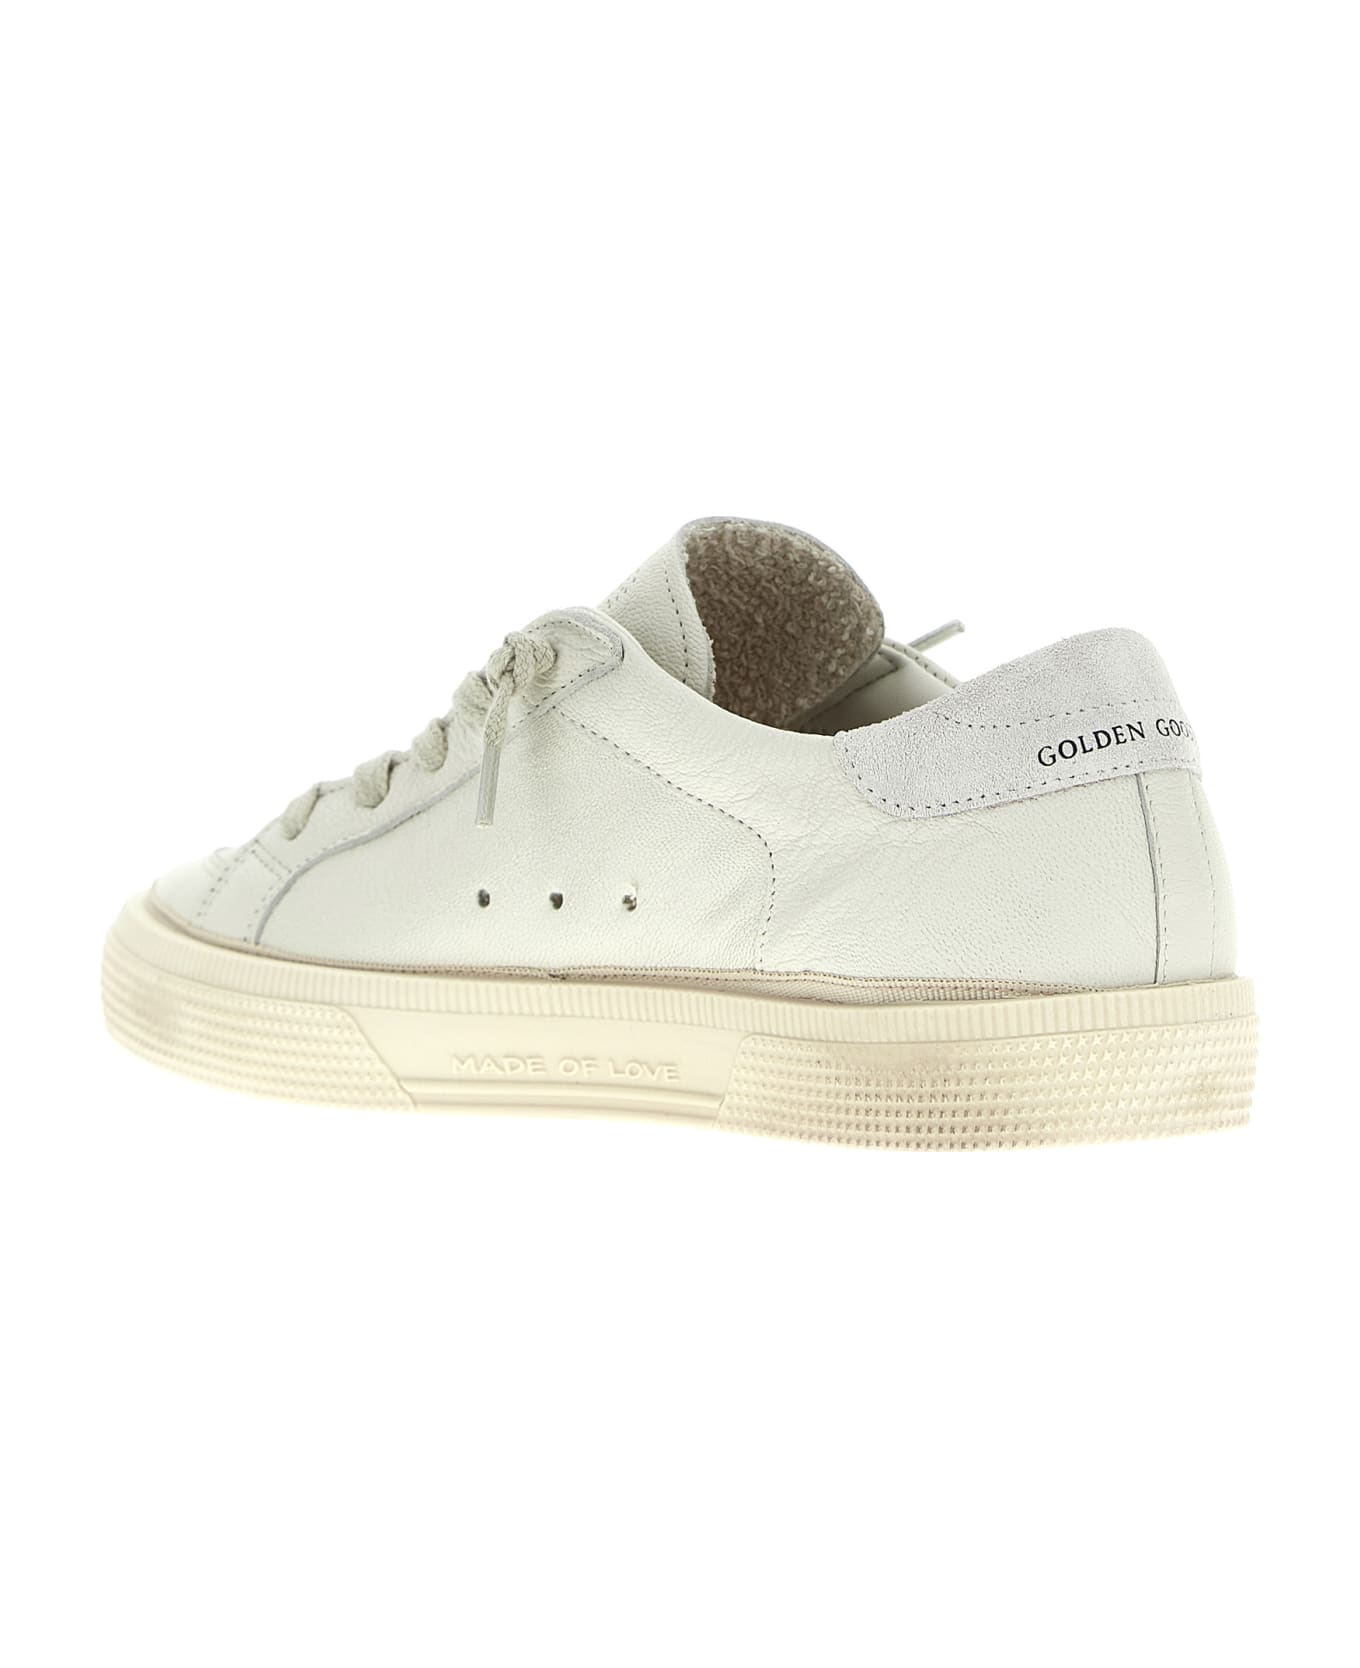 Golden Goose 'may' Sneakers - Optic White